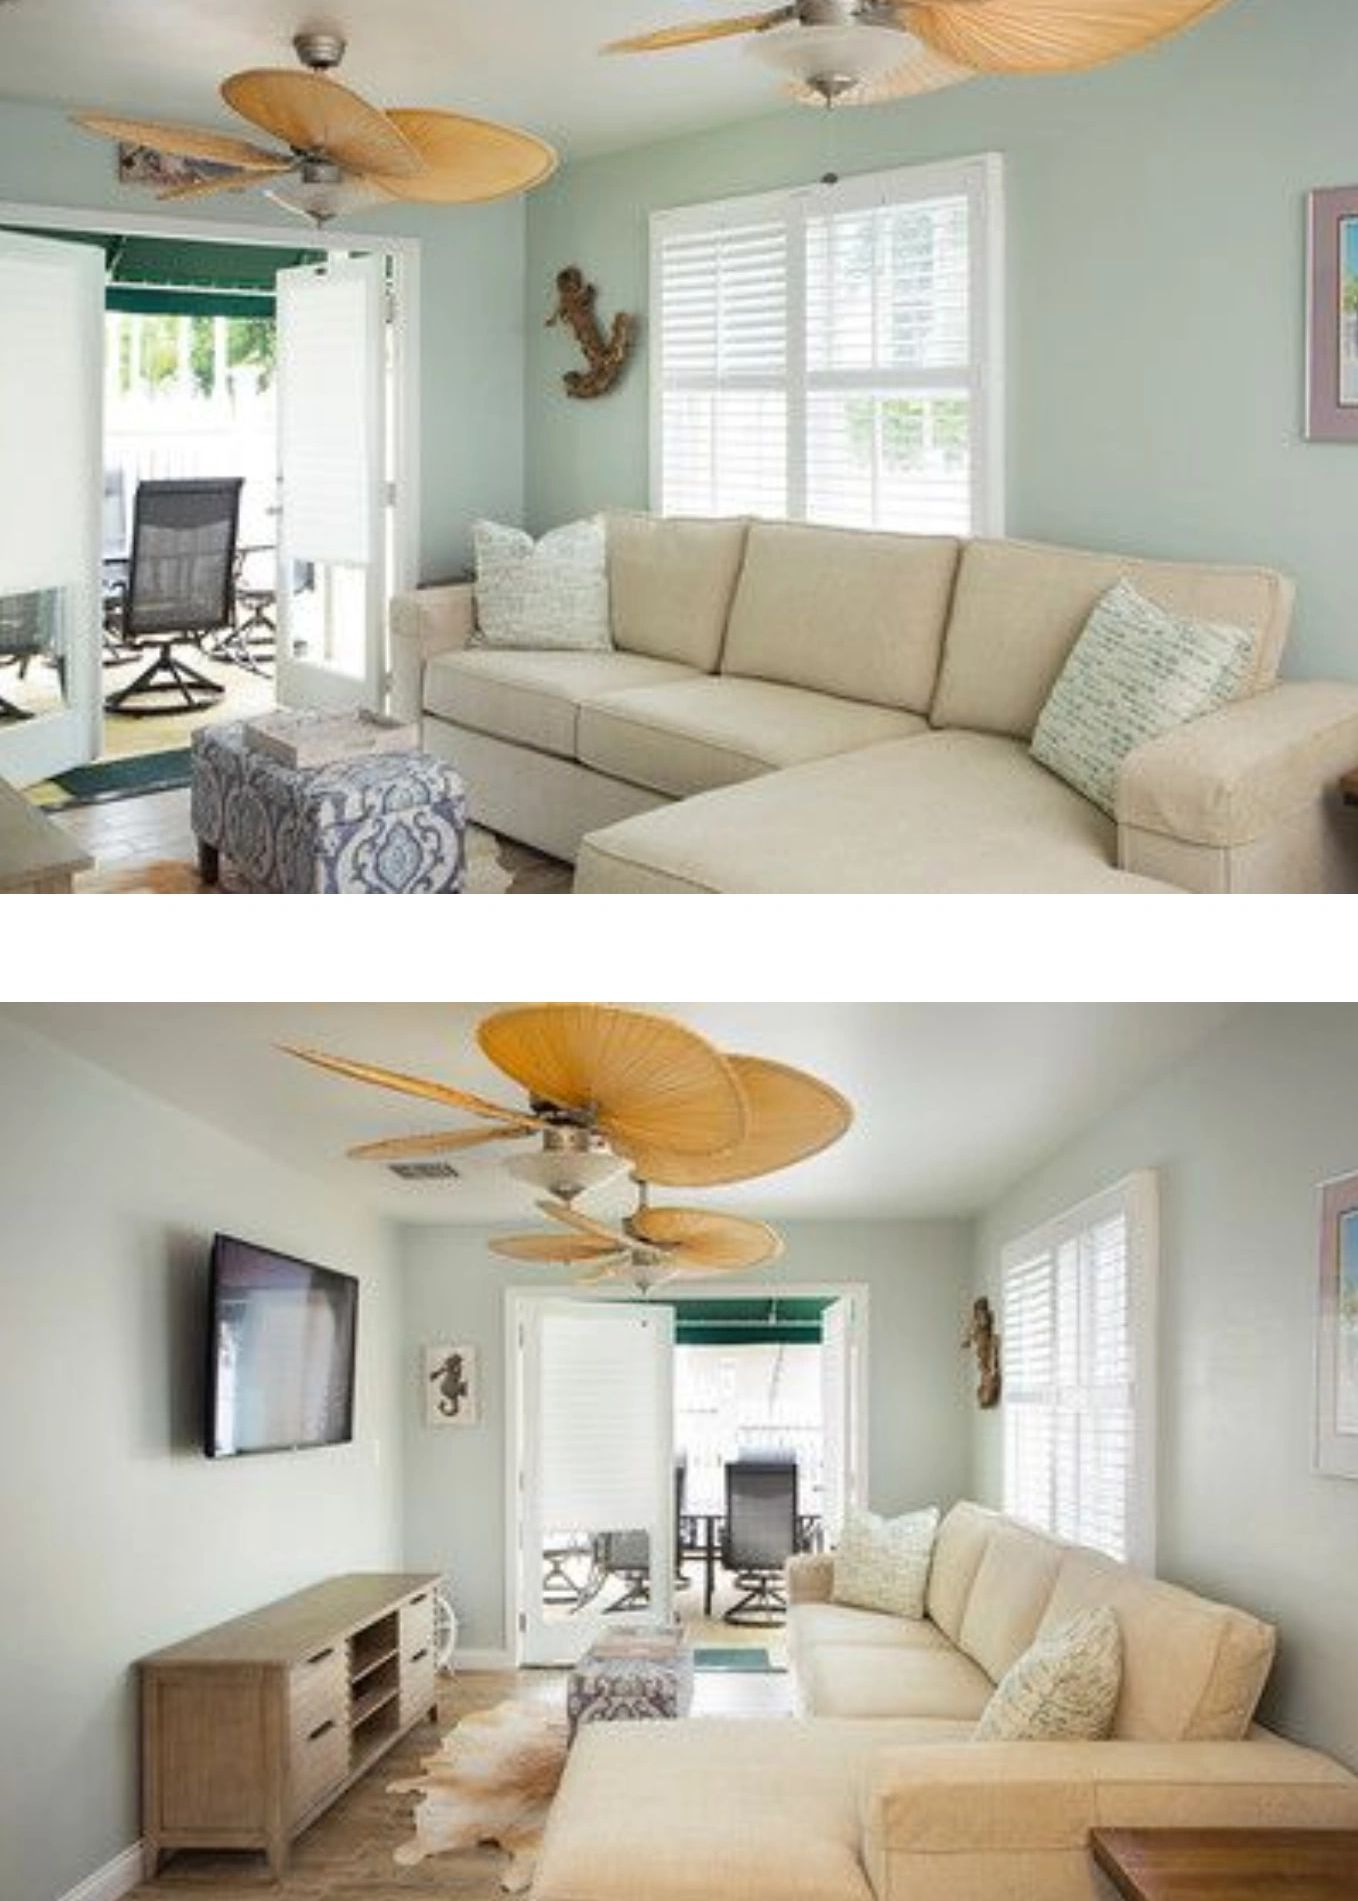 Sofa area ceiling fans French doors Flat screen TV